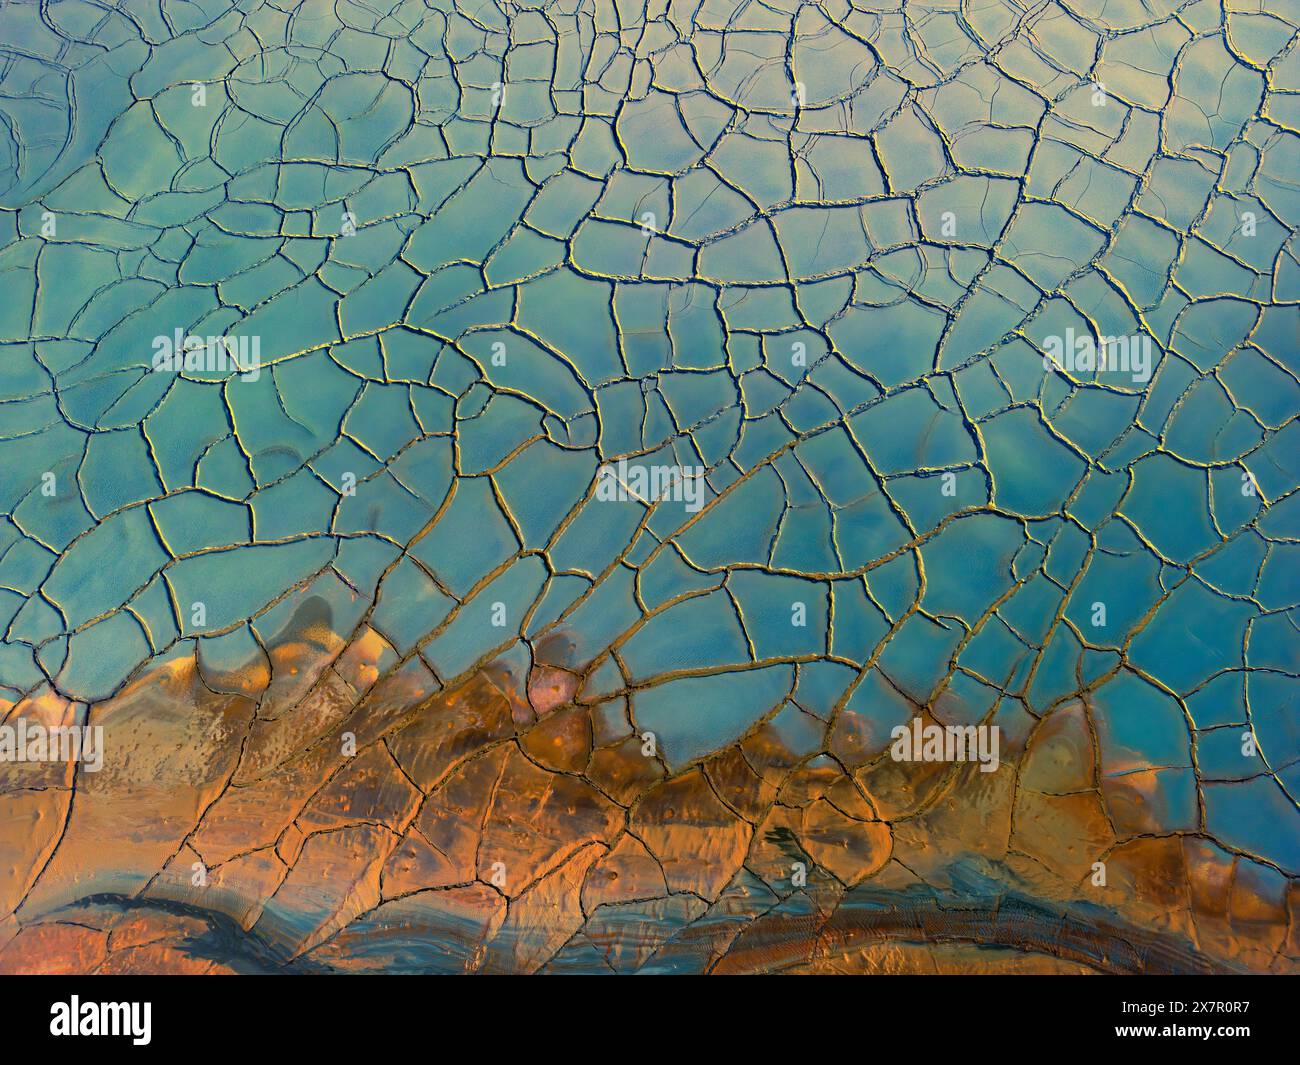 An aerial photograph captures the intriguing textures and contrasting colors of crackled dry mud, showcasing the natural patterns and abstract beauty Stock Photo